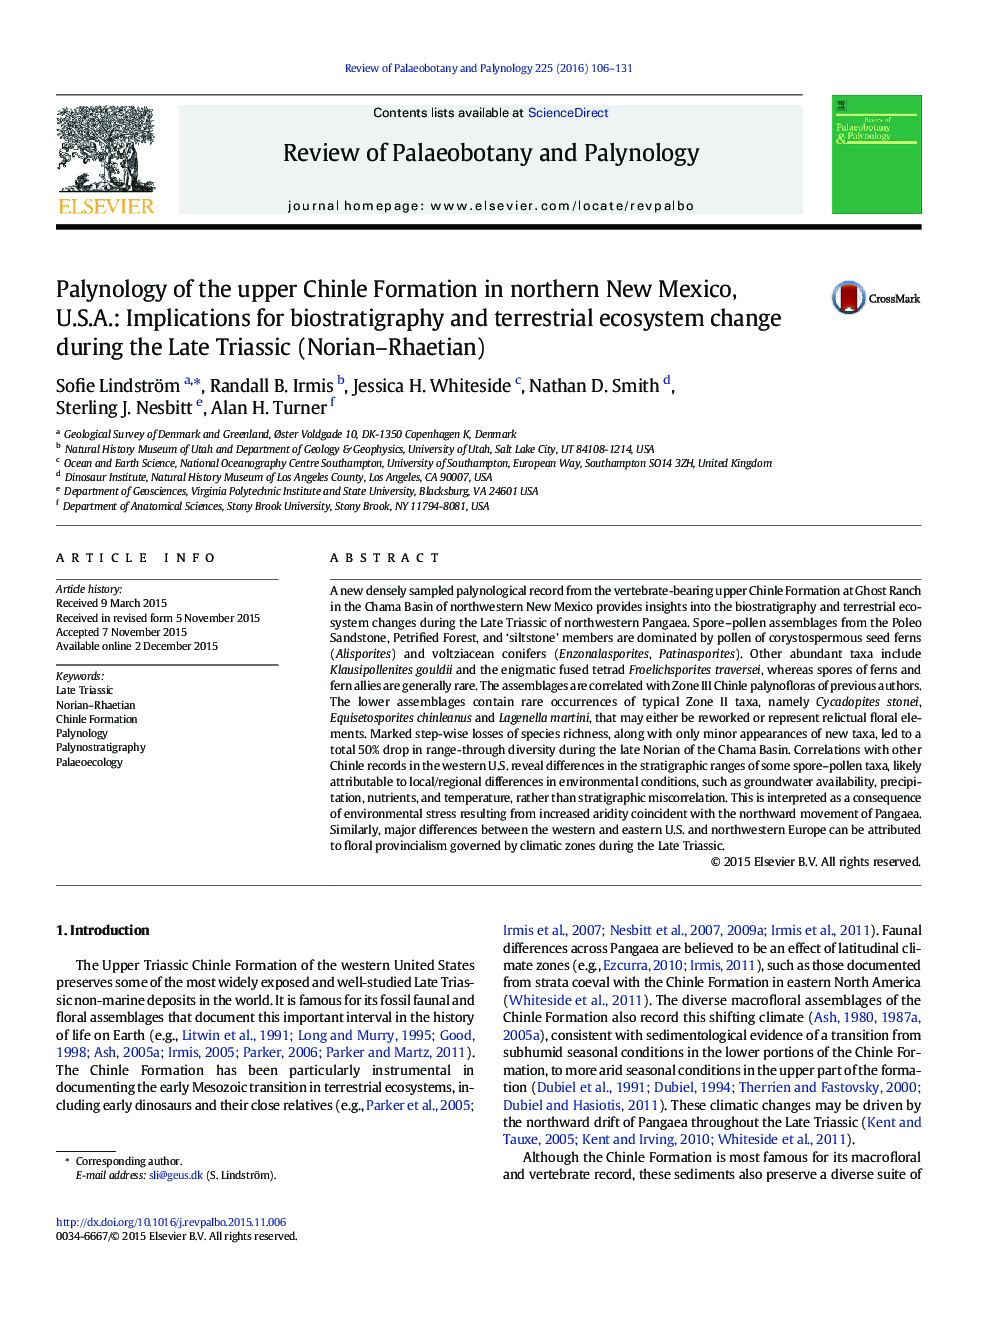 Palynology of the upper Chinle Formation in northern New Mexico, U.S.A.: Implications for biostratigraphy and terrestrial ecosystem change during the Late Triassic (Norian–Rhaetian)